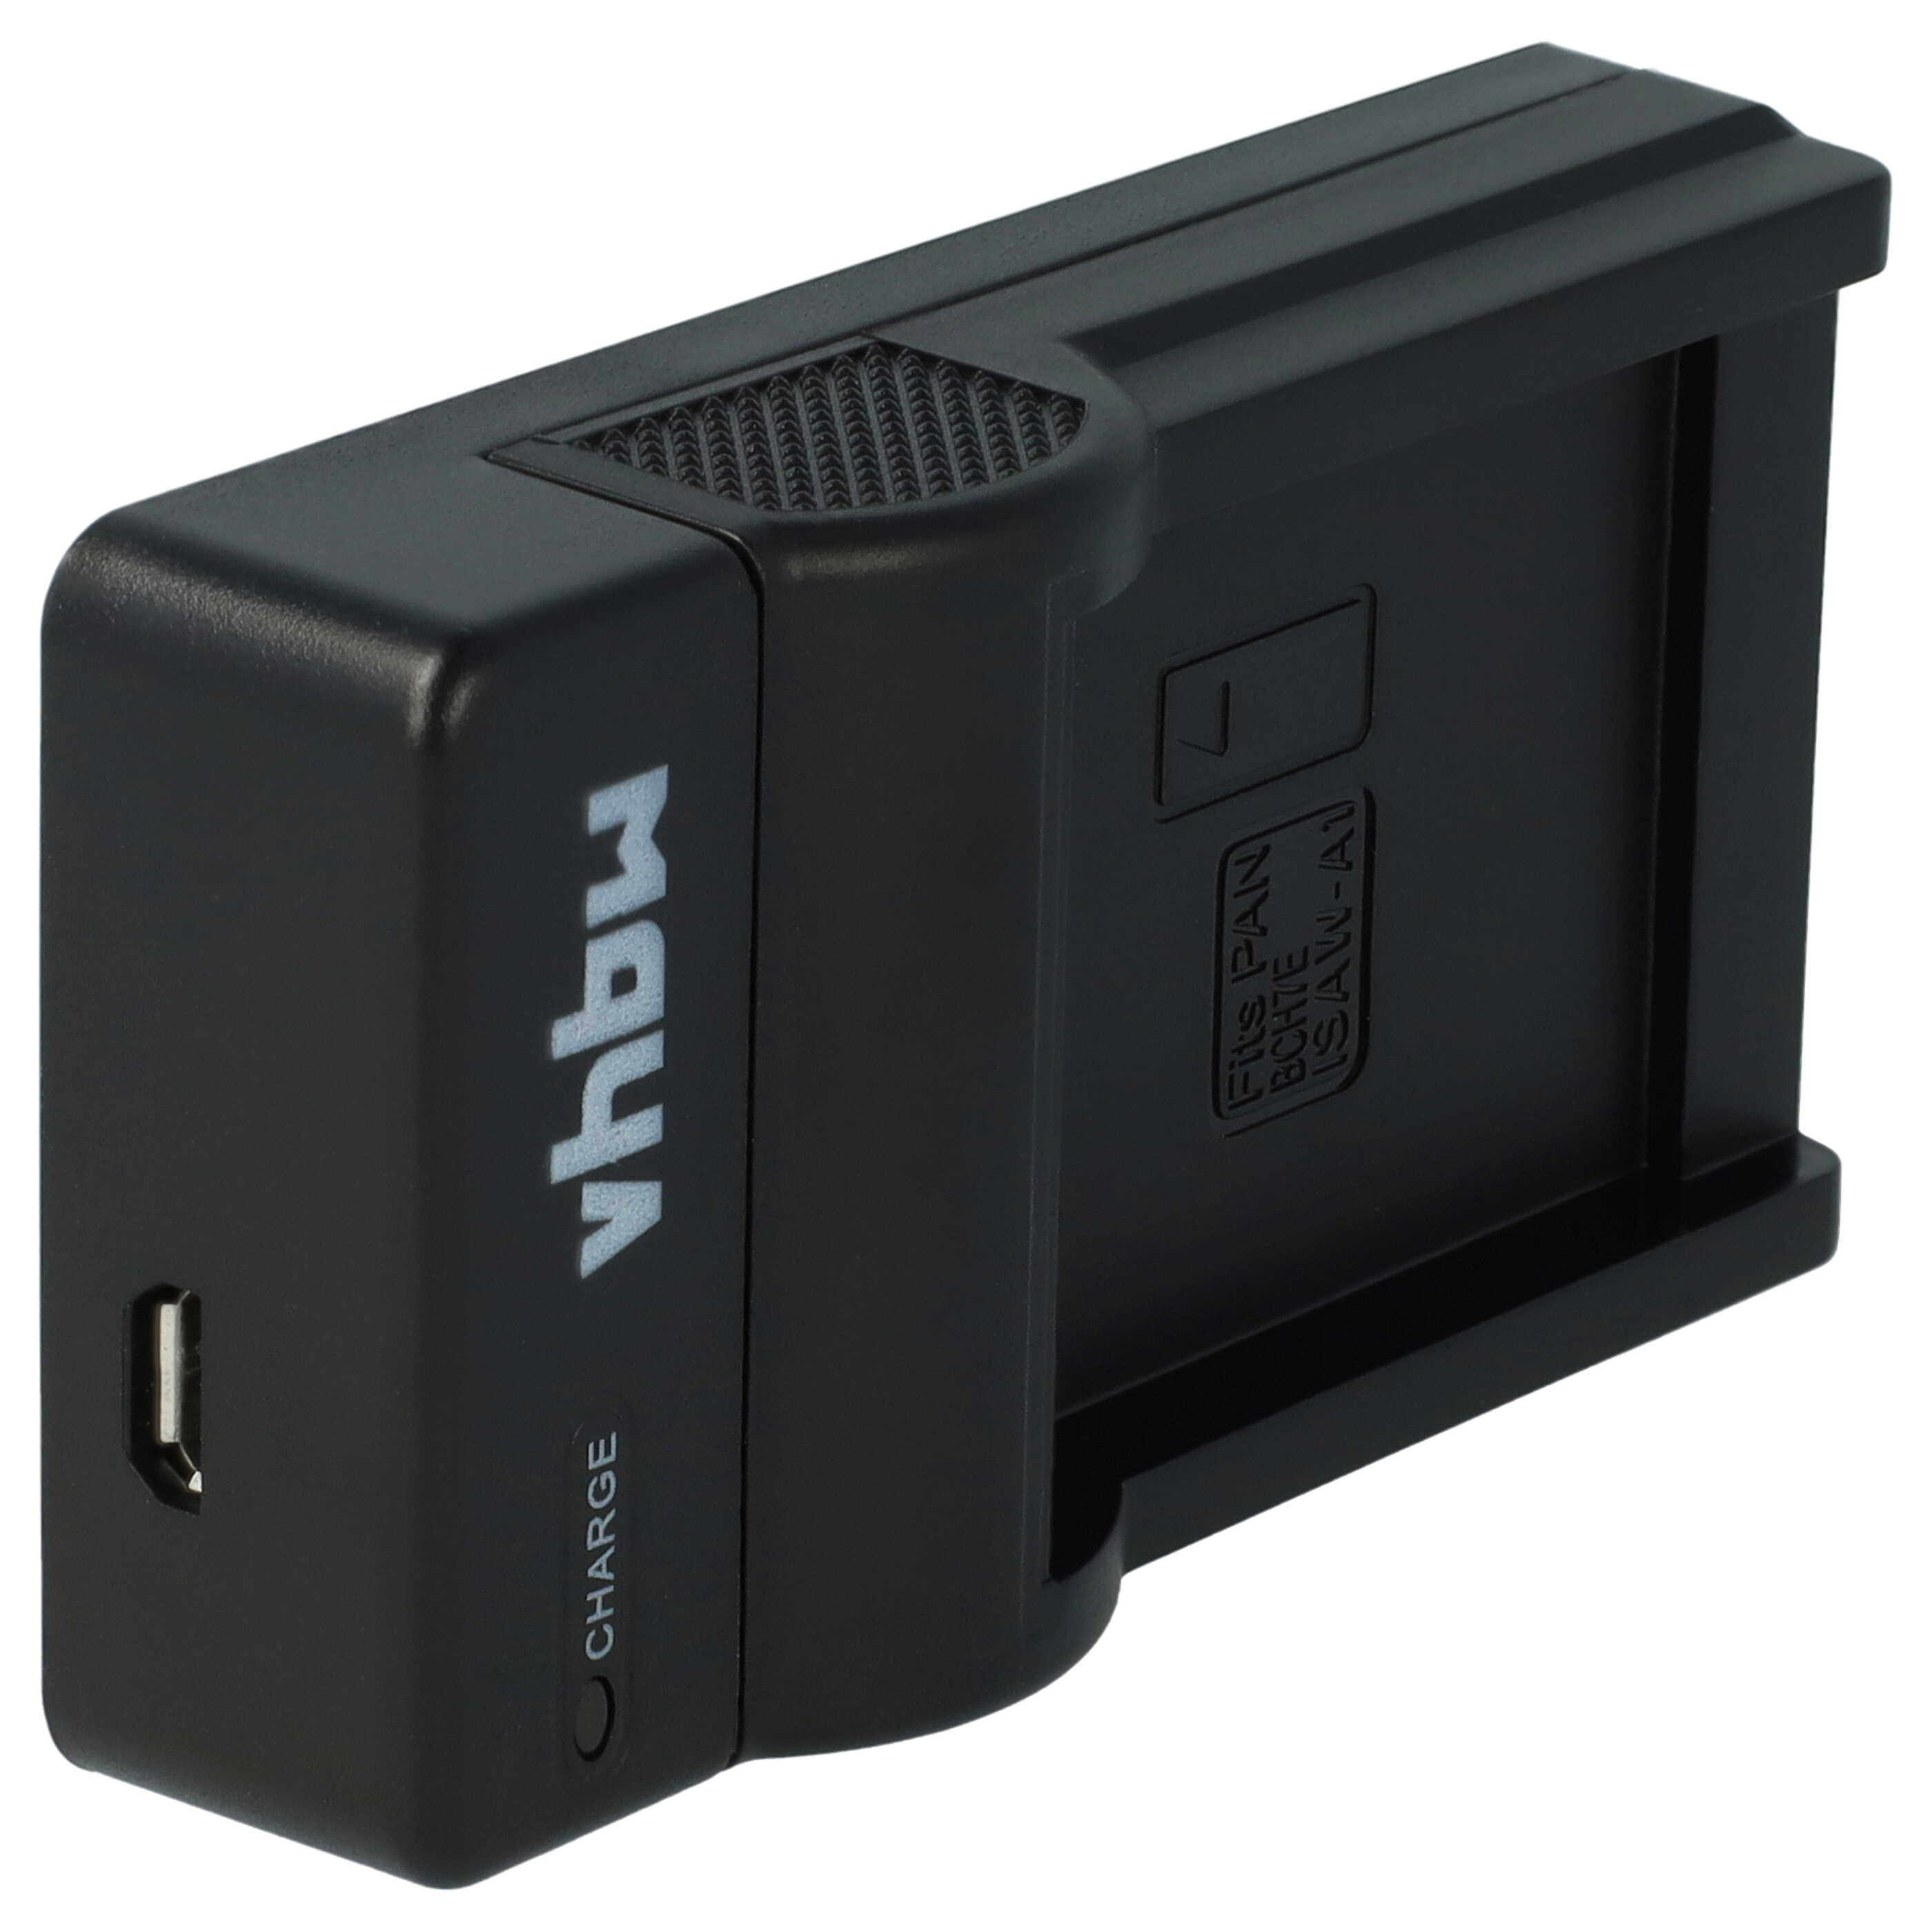 Battery Charger suitable for Lumix DMC-FP1 Camera etc. - 0.5 A, 4.2 V